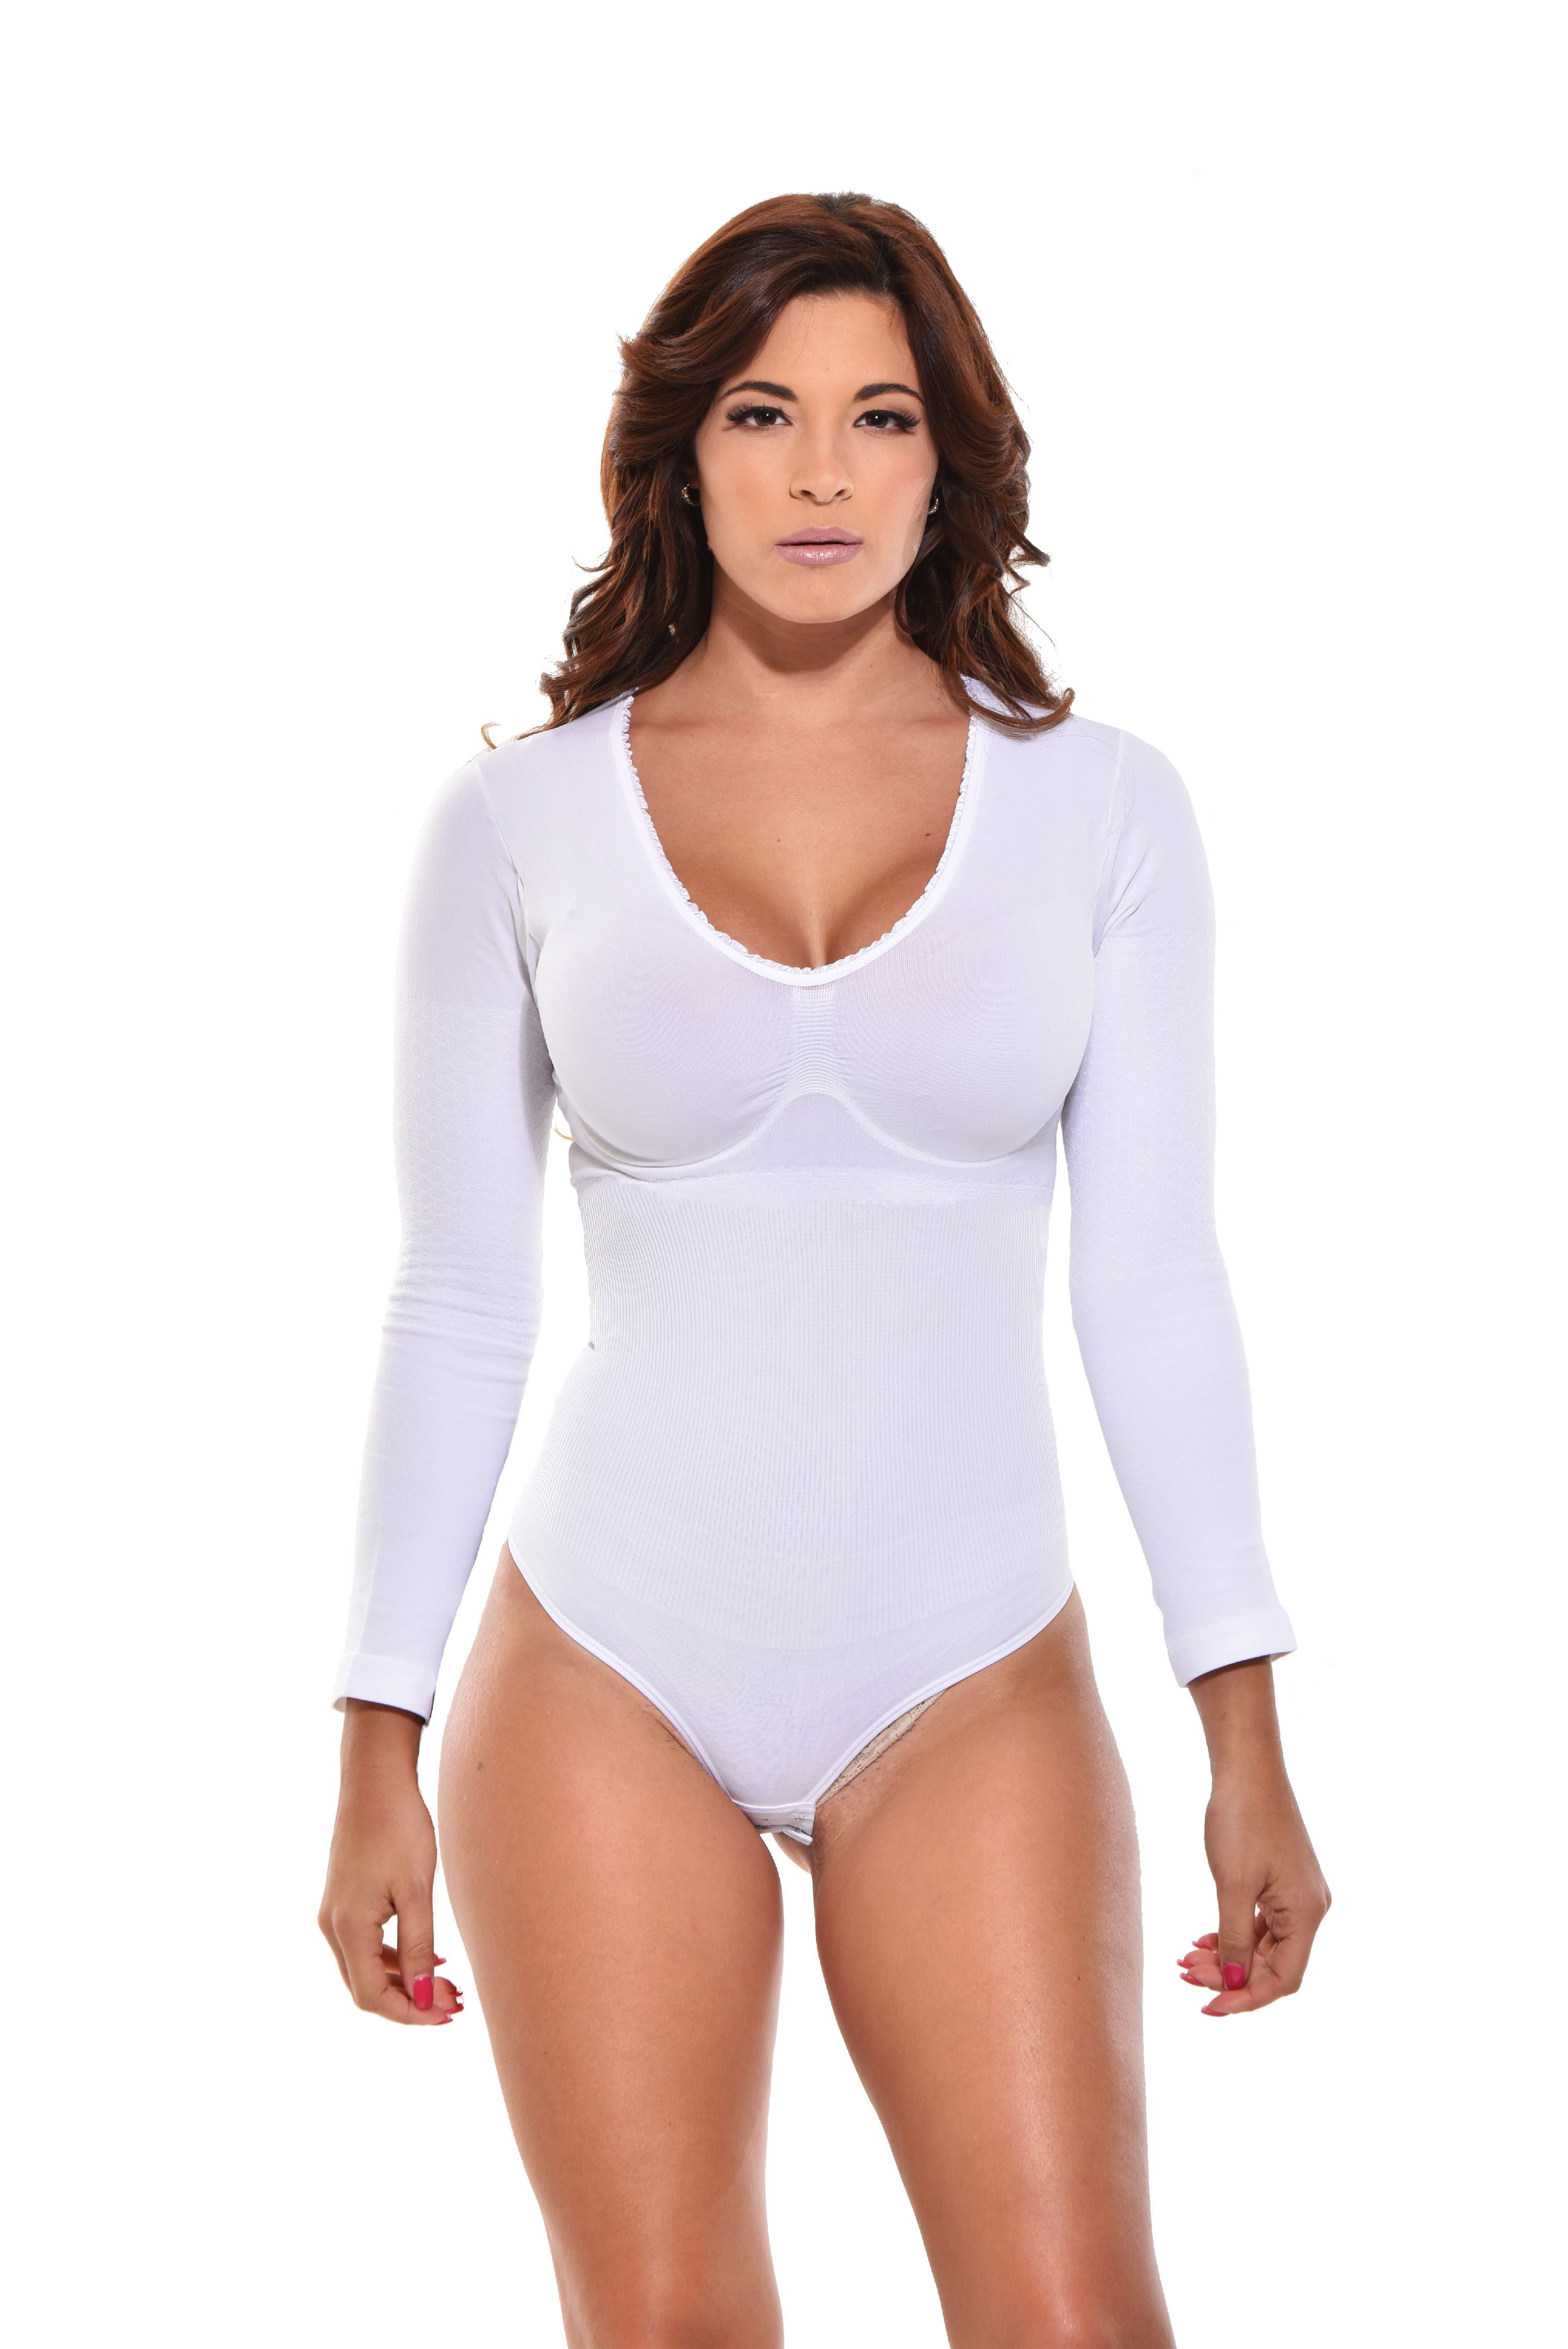 Your Contour Open Bust Firm Compression Body Shaper Briefer